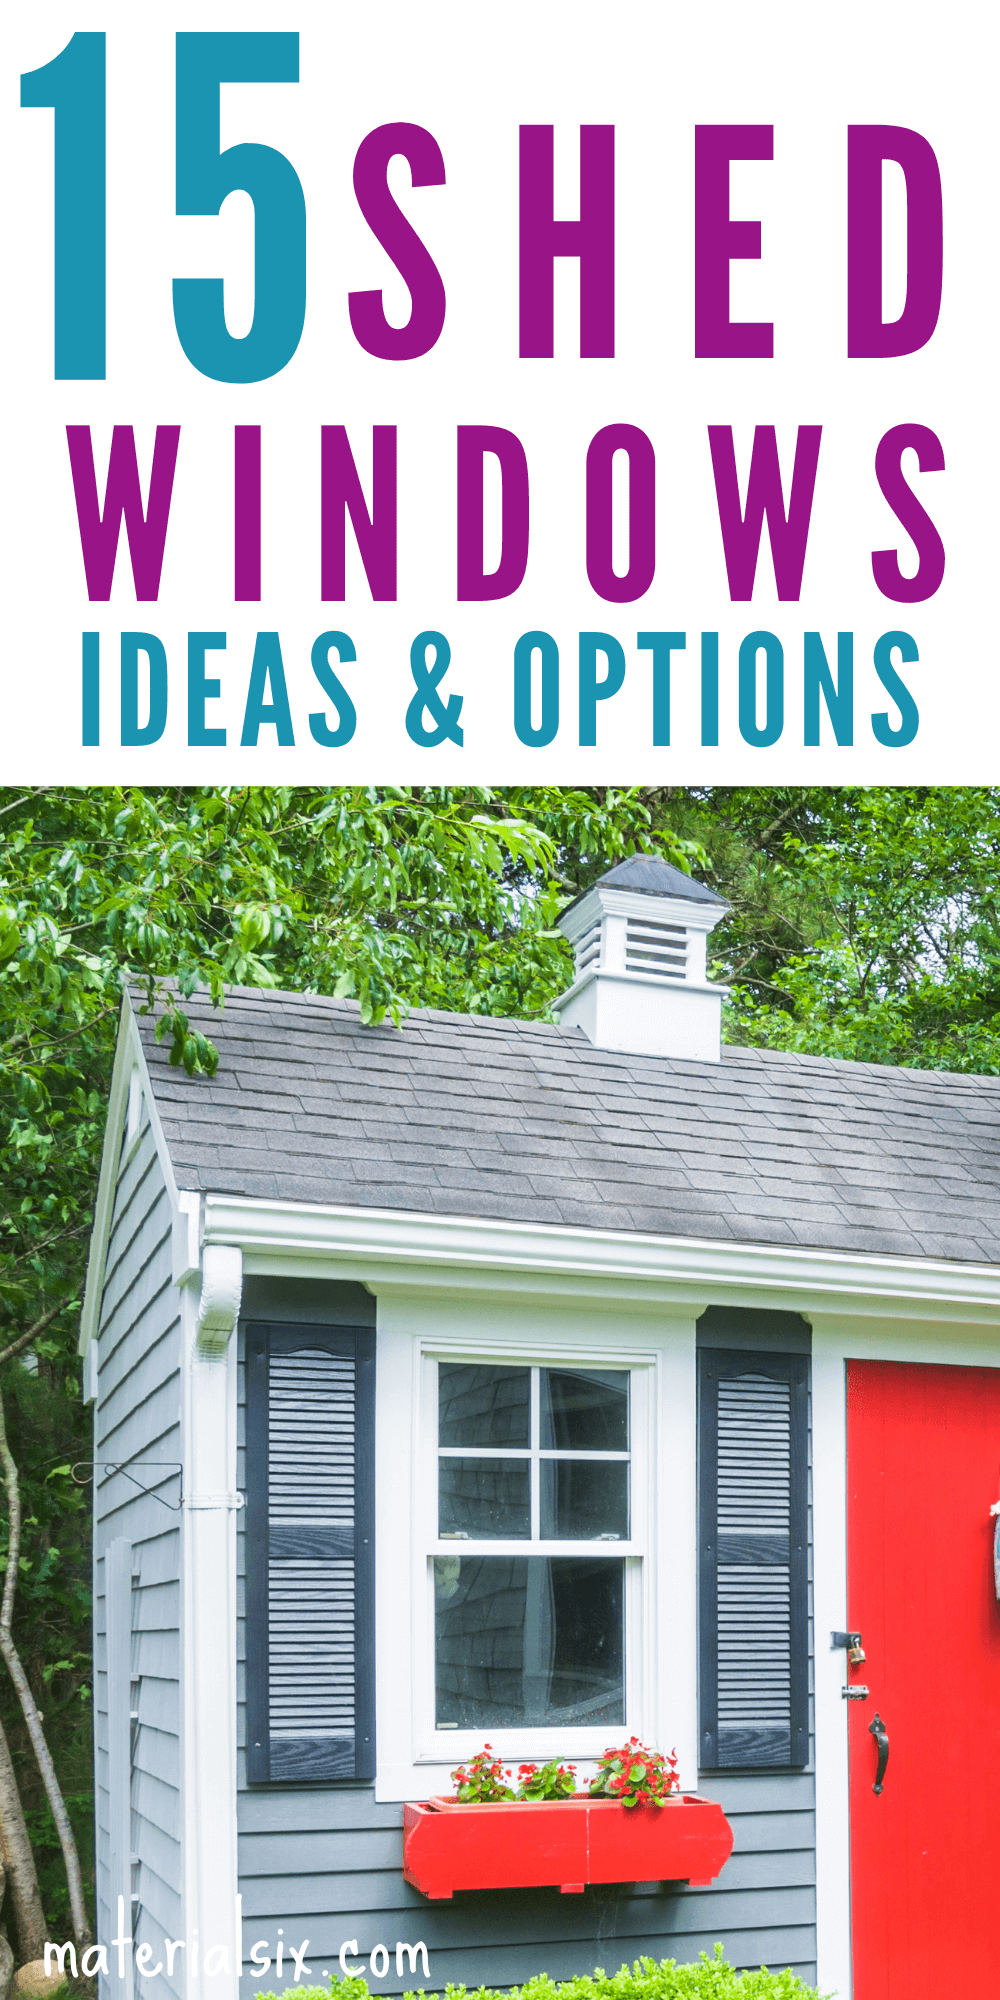 15 Shed Windows Ideas and Options 